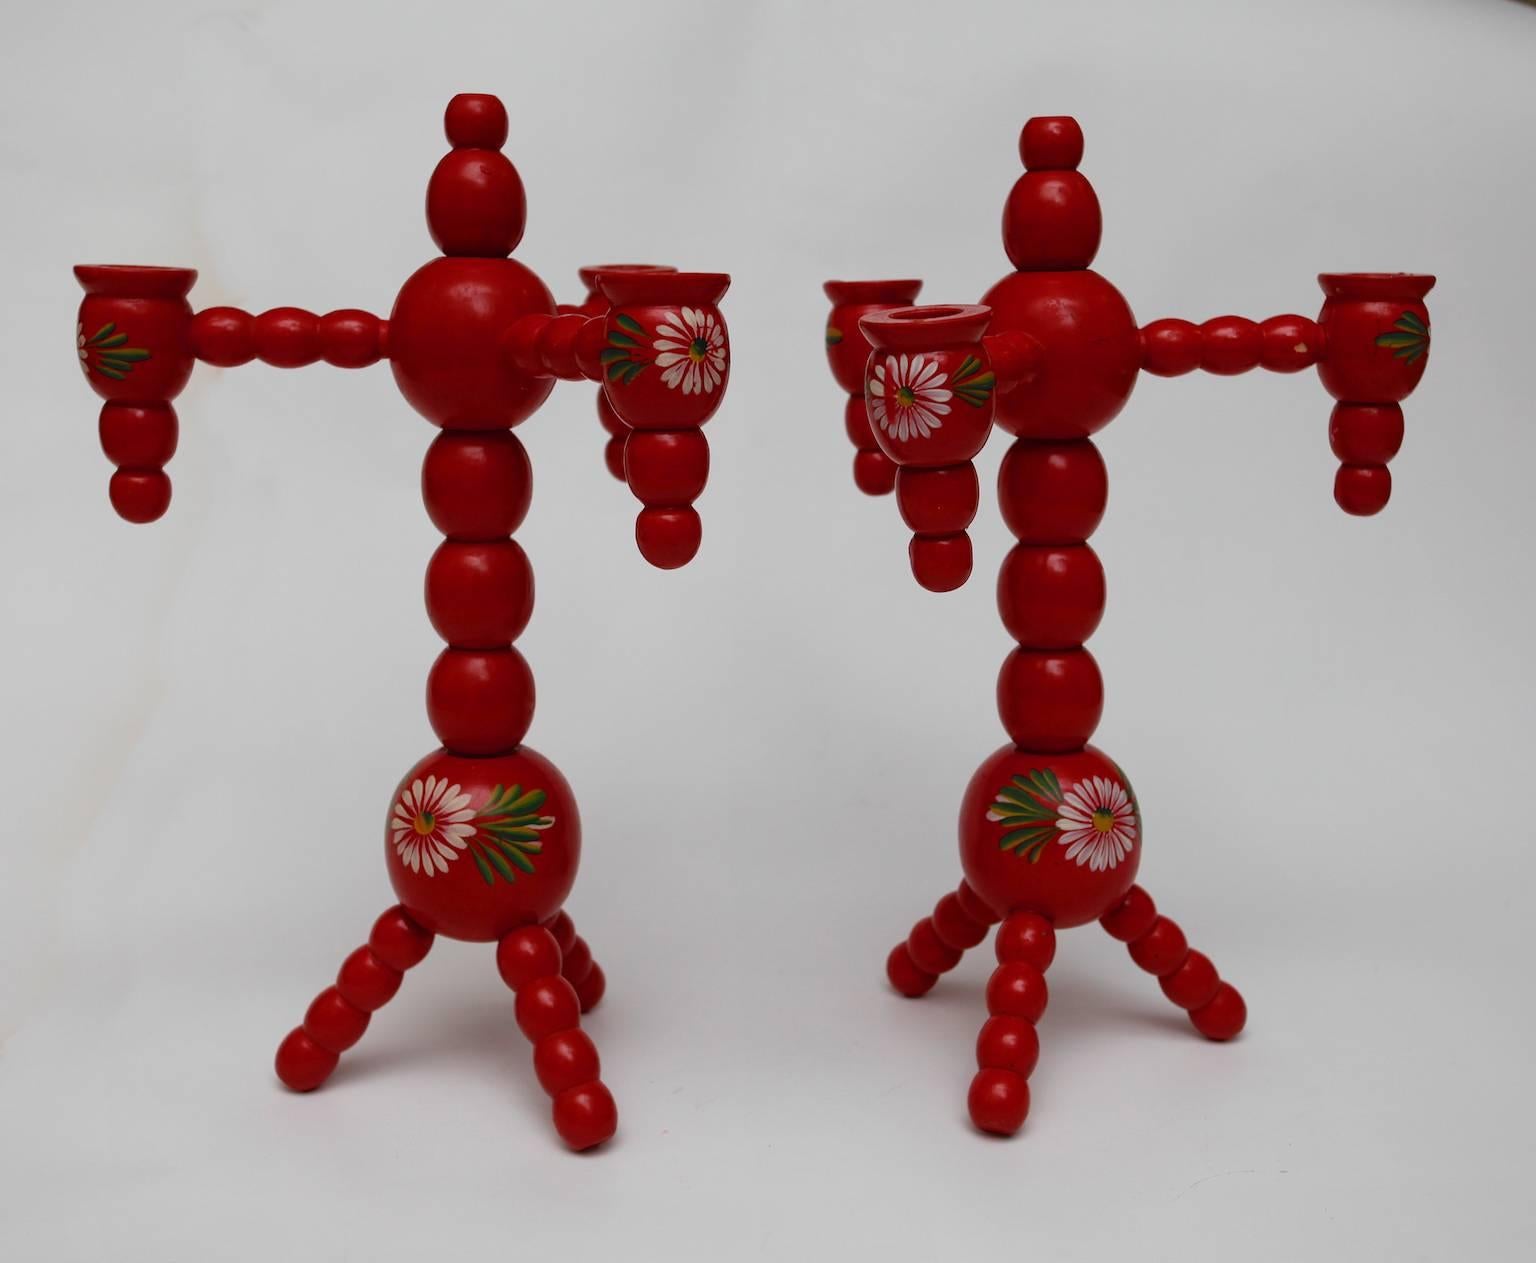 Traditional wooden, red Swedish christmas candelabras for three candles on Tripod Foot. Turned and hand-painted in traditional "Kurbits" style. 
At this time of the year these candelabras are decorating many Swedish homes tighter with